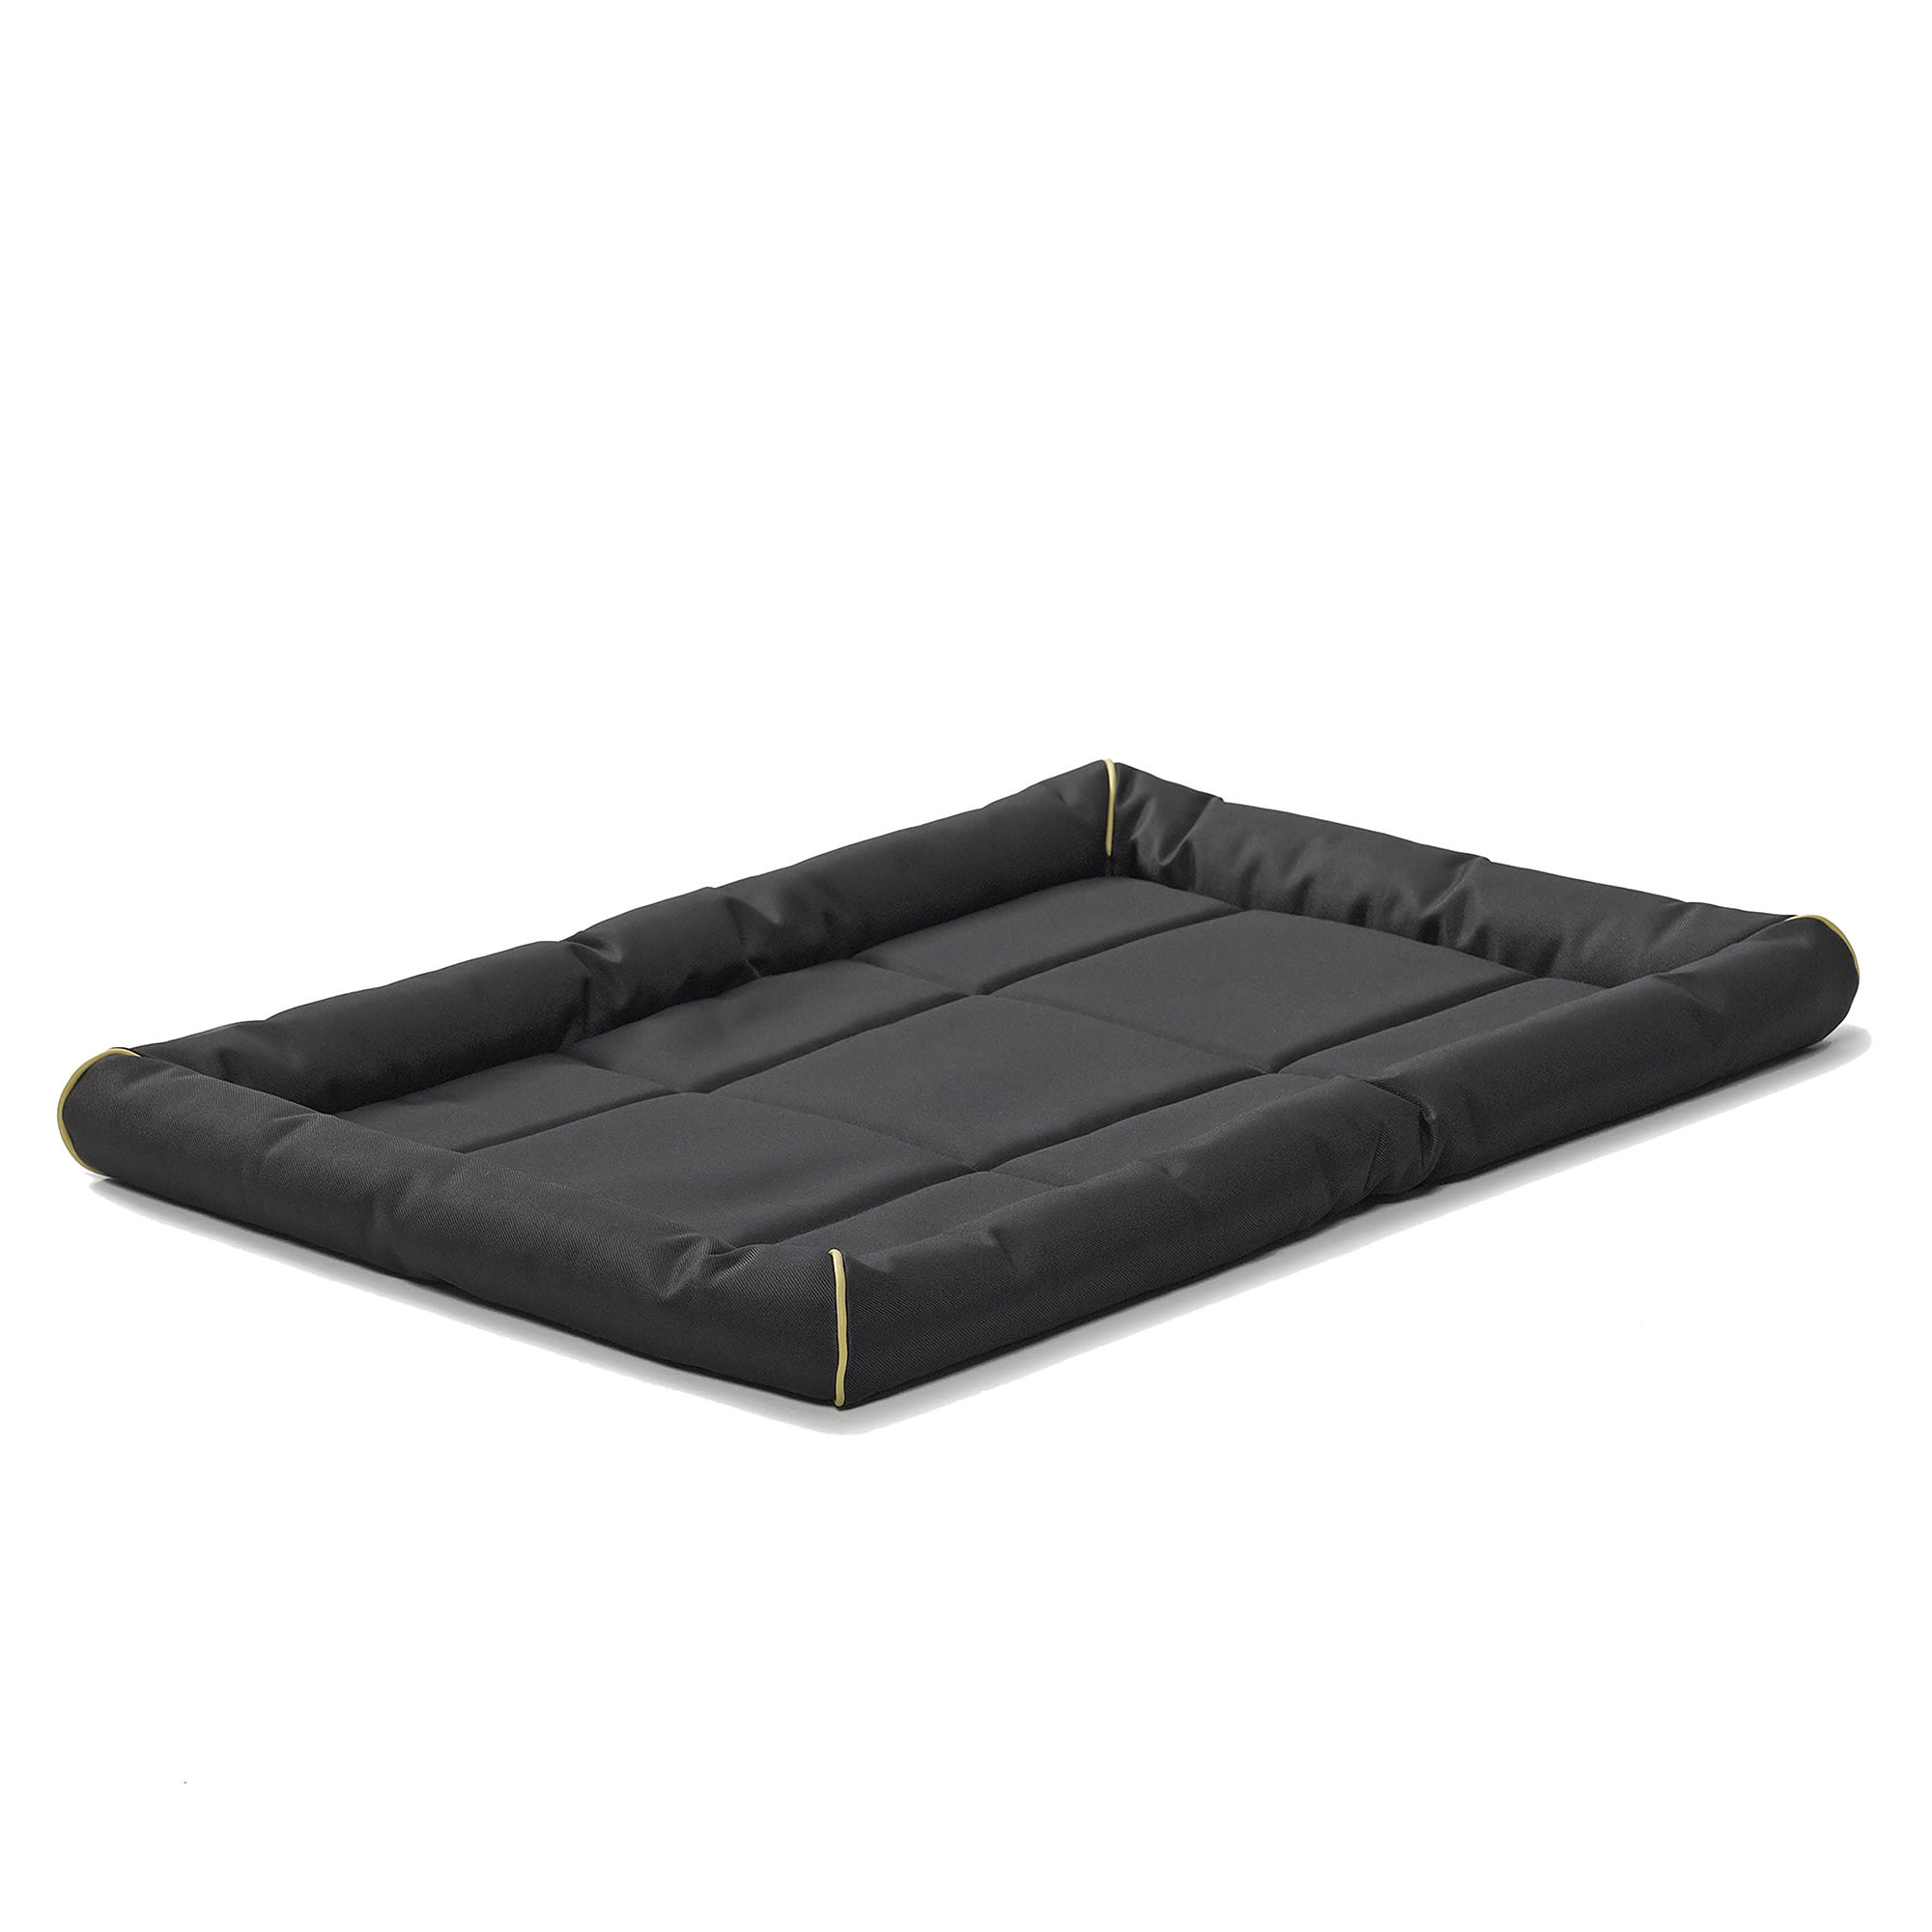 Photos - Dog Bed / Basket Midwest Quiet Time Maxx Black Dog Bed, 48.5" L X 31" W, X-Large, B 